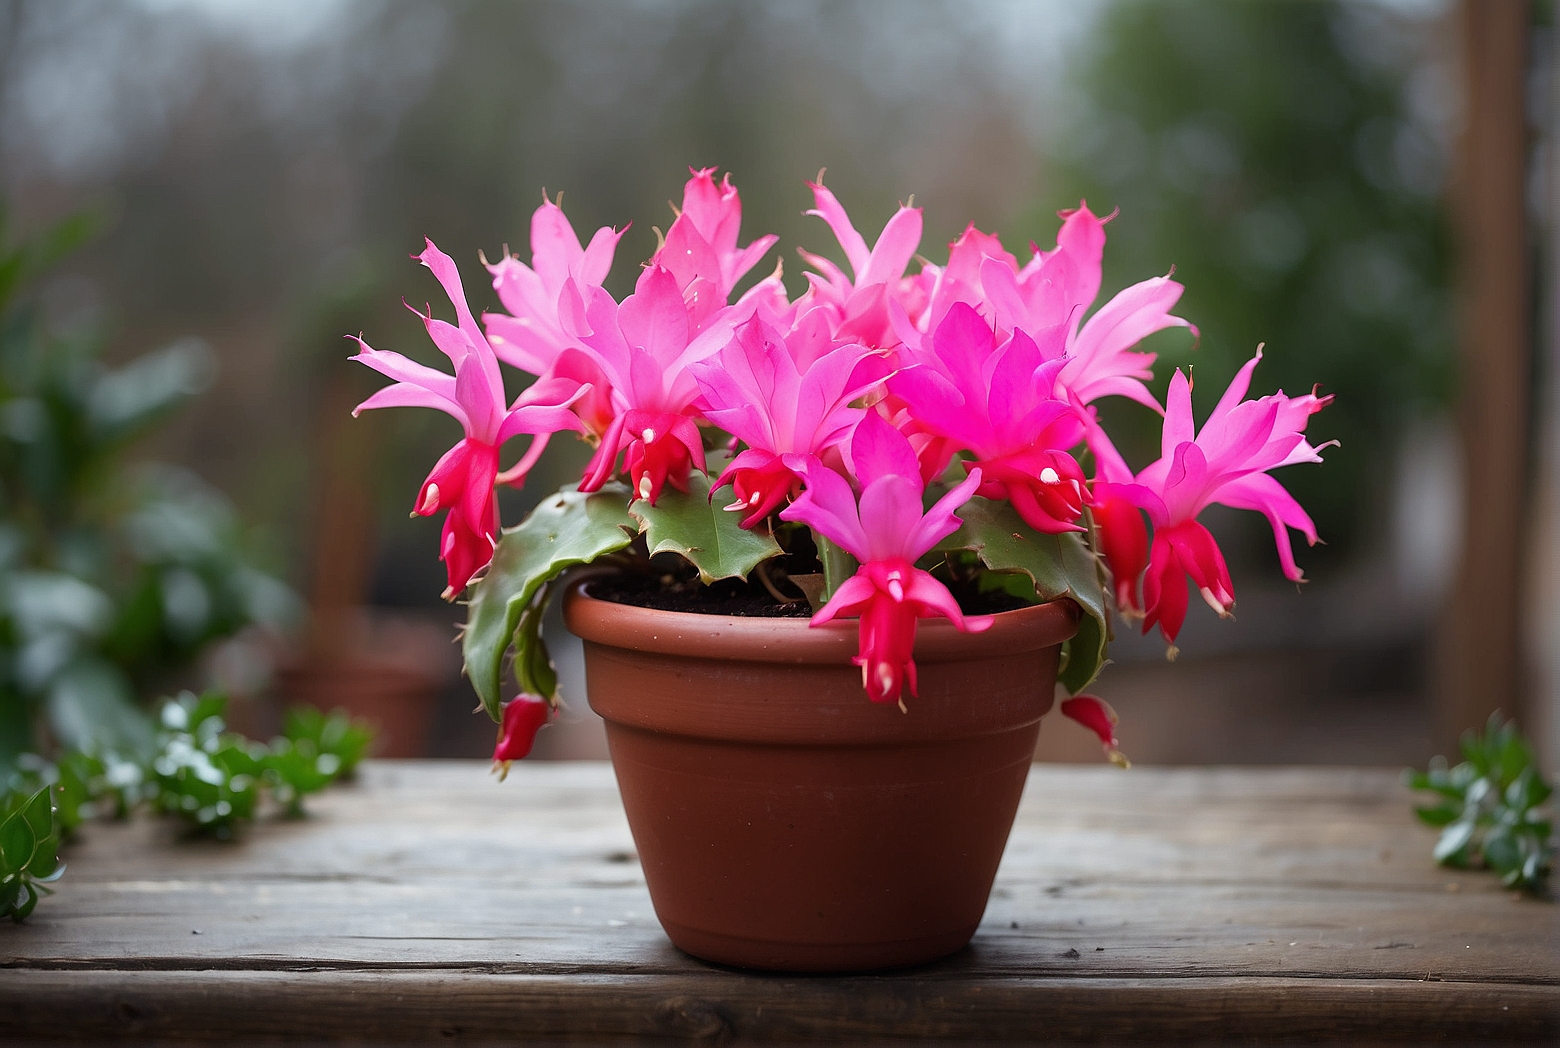 When to Bring in Your Christmas Cactus from Outside